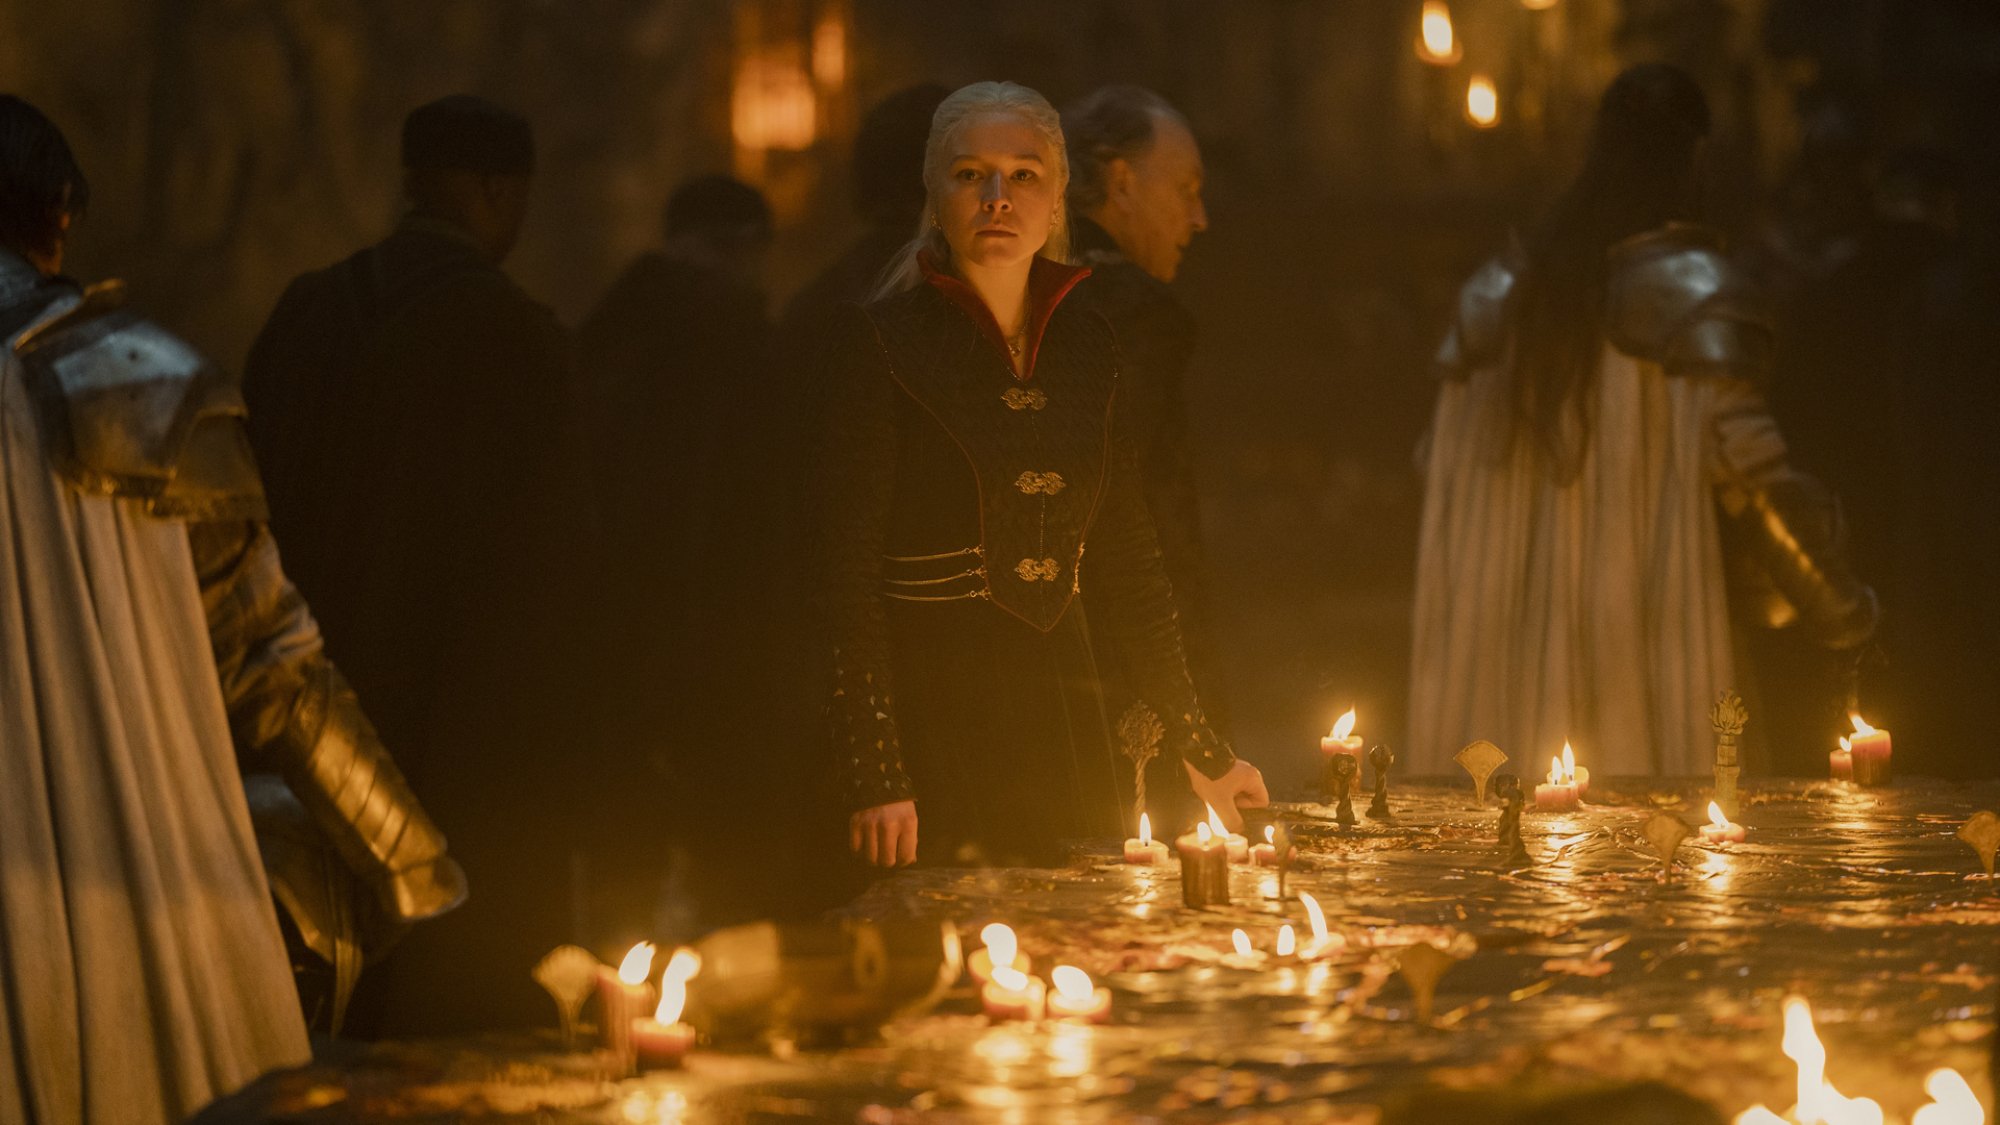 Emma D'Arcy stands at a candlelit war table as Rhaenyra Targaryen in "House of the Dragon."